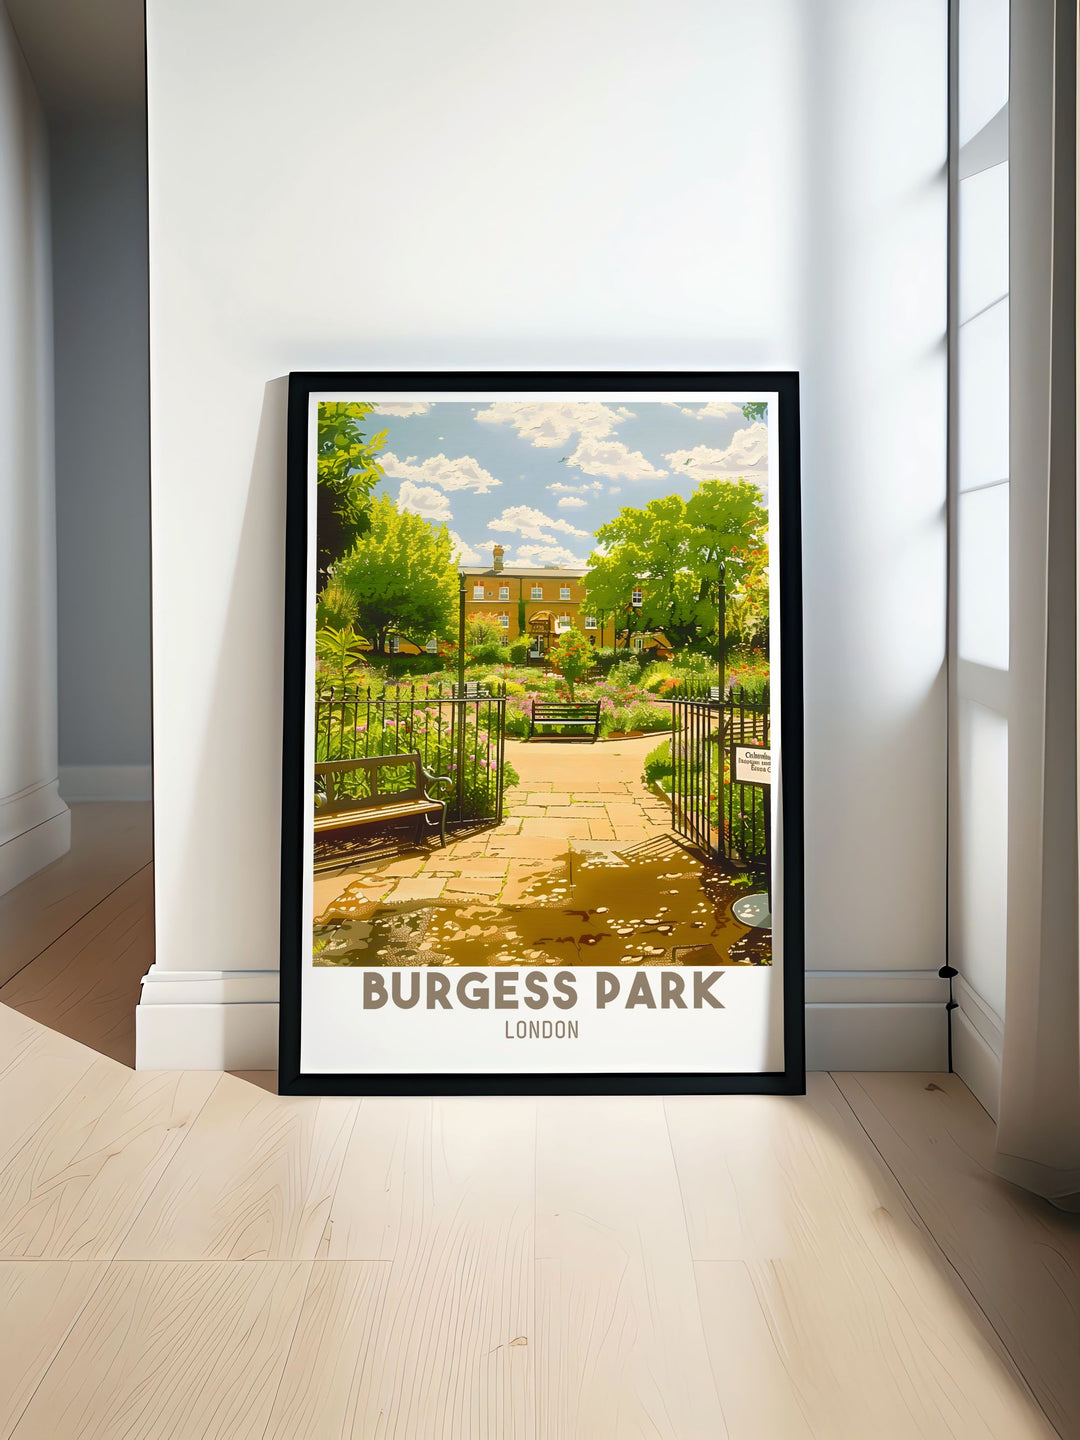 A vibrant depiction of Burgess Park in London featuring the lush greenery and tranquil Chumleigh Gardens, along with the inviting Chumleigh Café. The detailed artwork captures the serene atmosphere and vibrant colors, making it a perfect modern wall decor for any space.